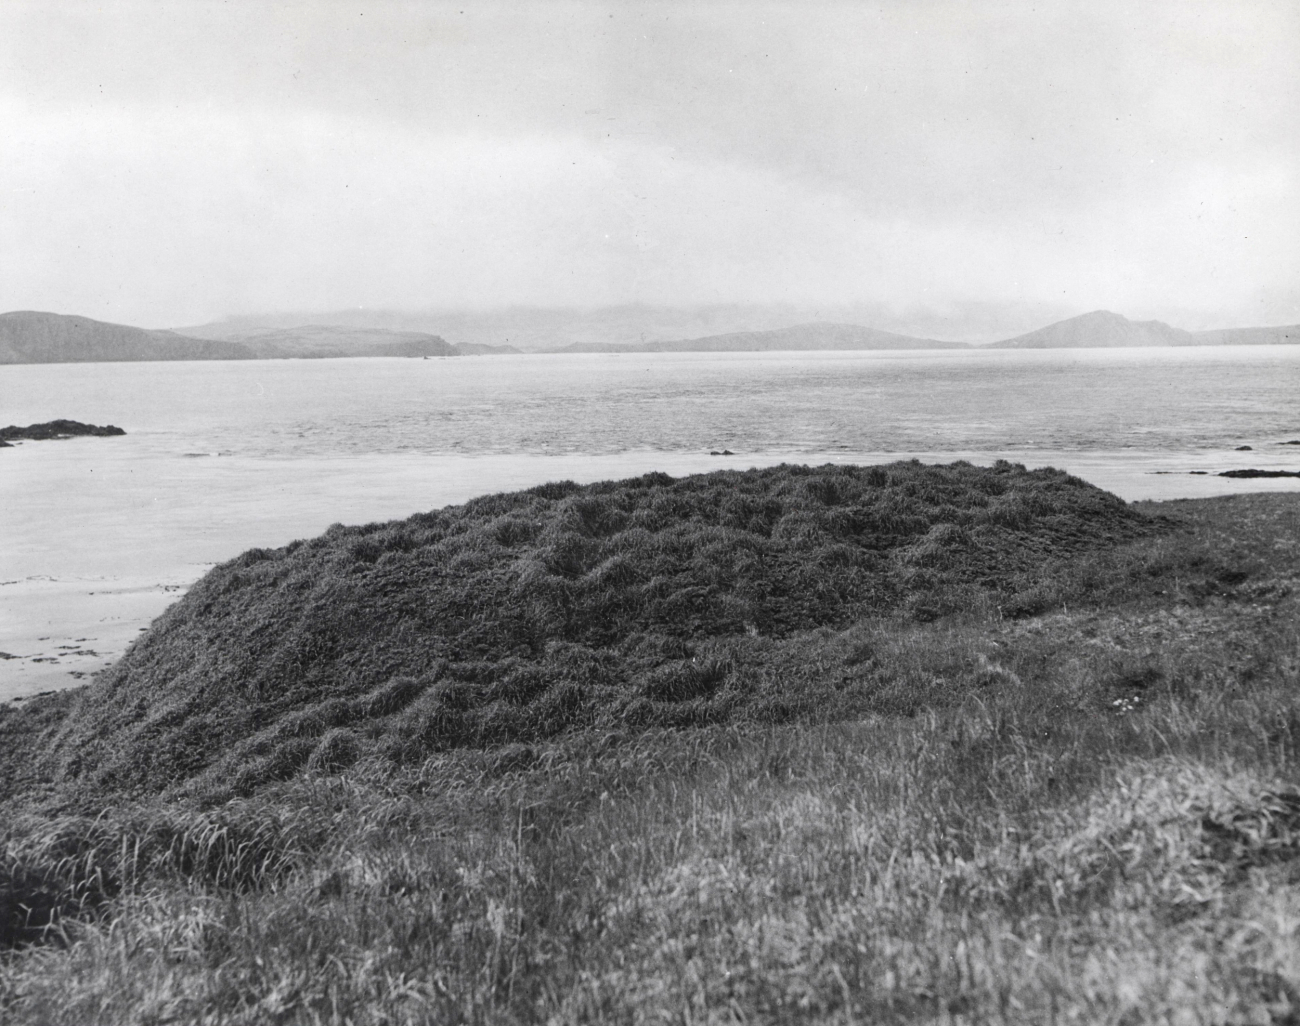 Site of an old Aleutian village revealed by rank growth of grass several feet in height